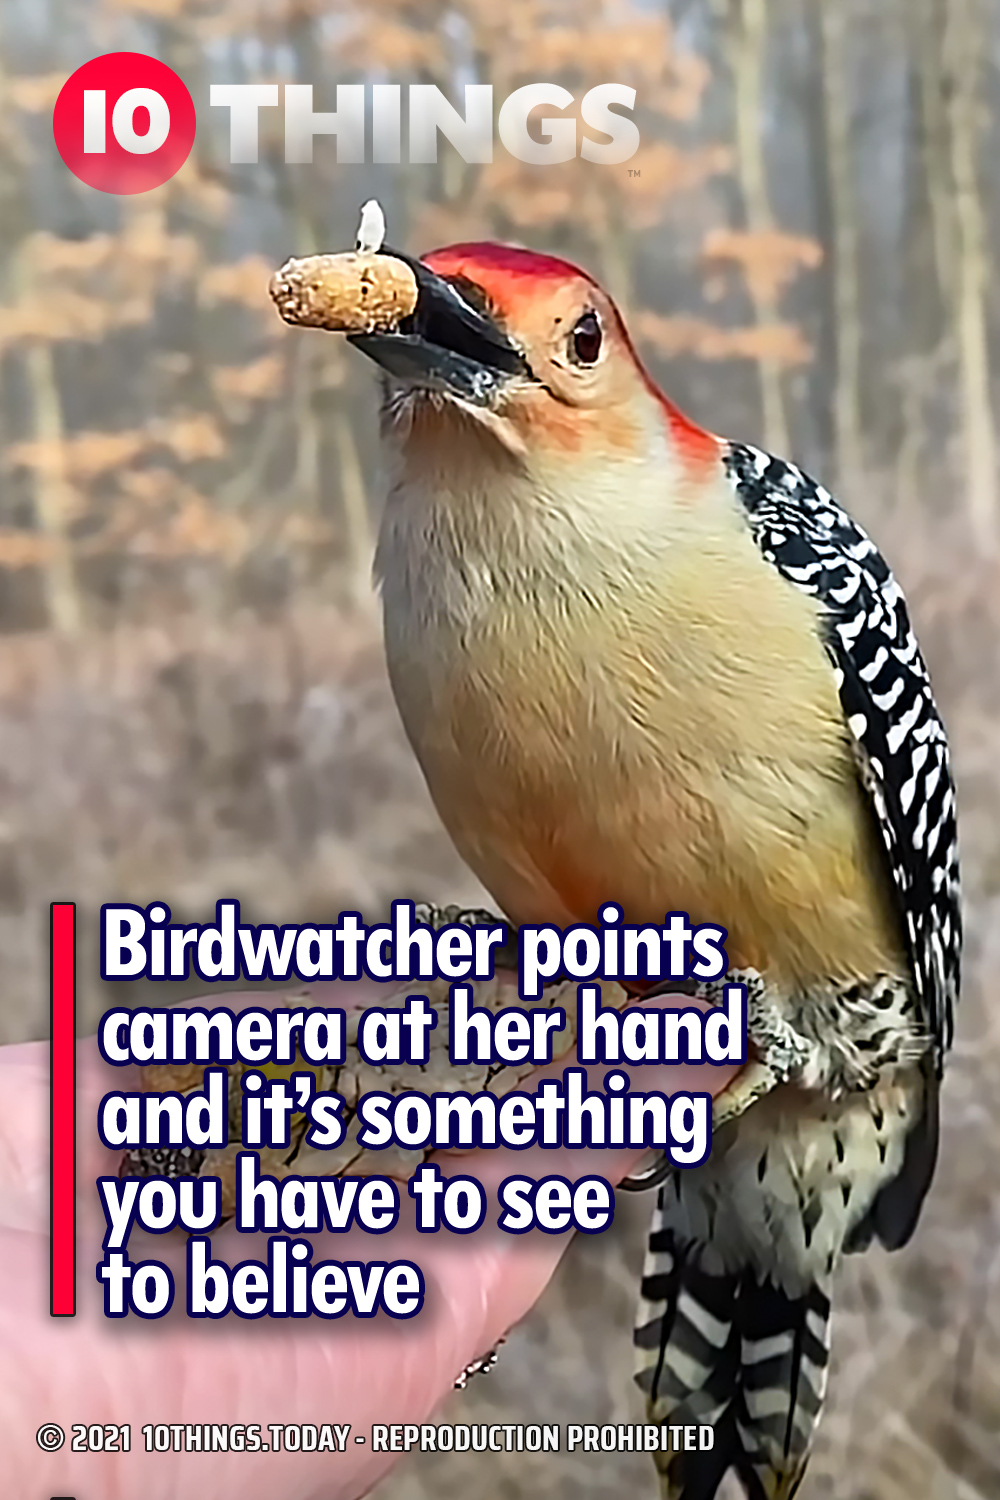 Birdwatcher points camera at her hand and it’s something you have to see to believe